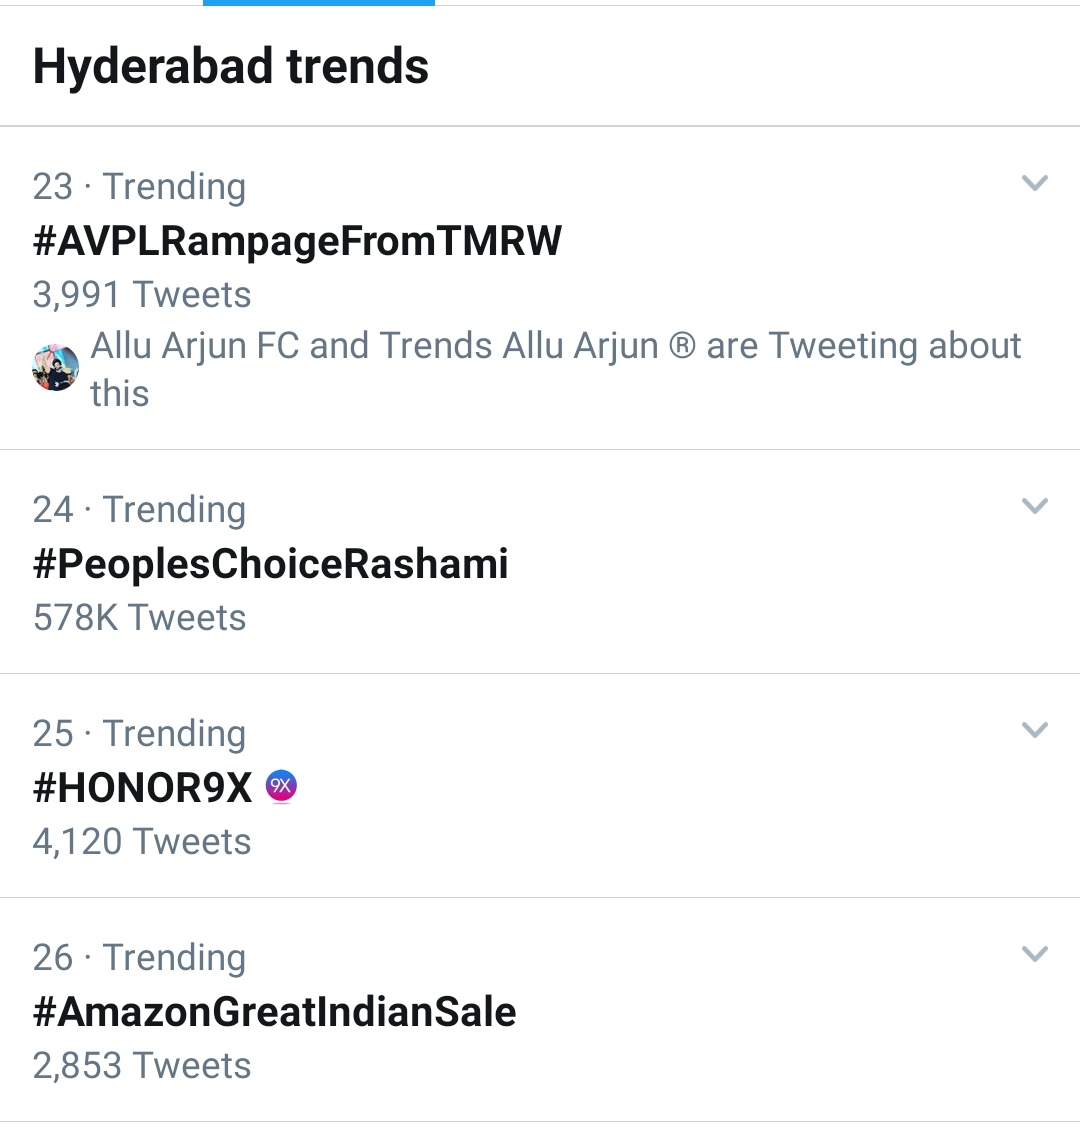 #AVPLRampageFromTMRW
Our Two Tags Now Trending Both India and Hyderabad Trends 

#AlaVaikunthapurramuloo 
#AVPLFromTomorrow